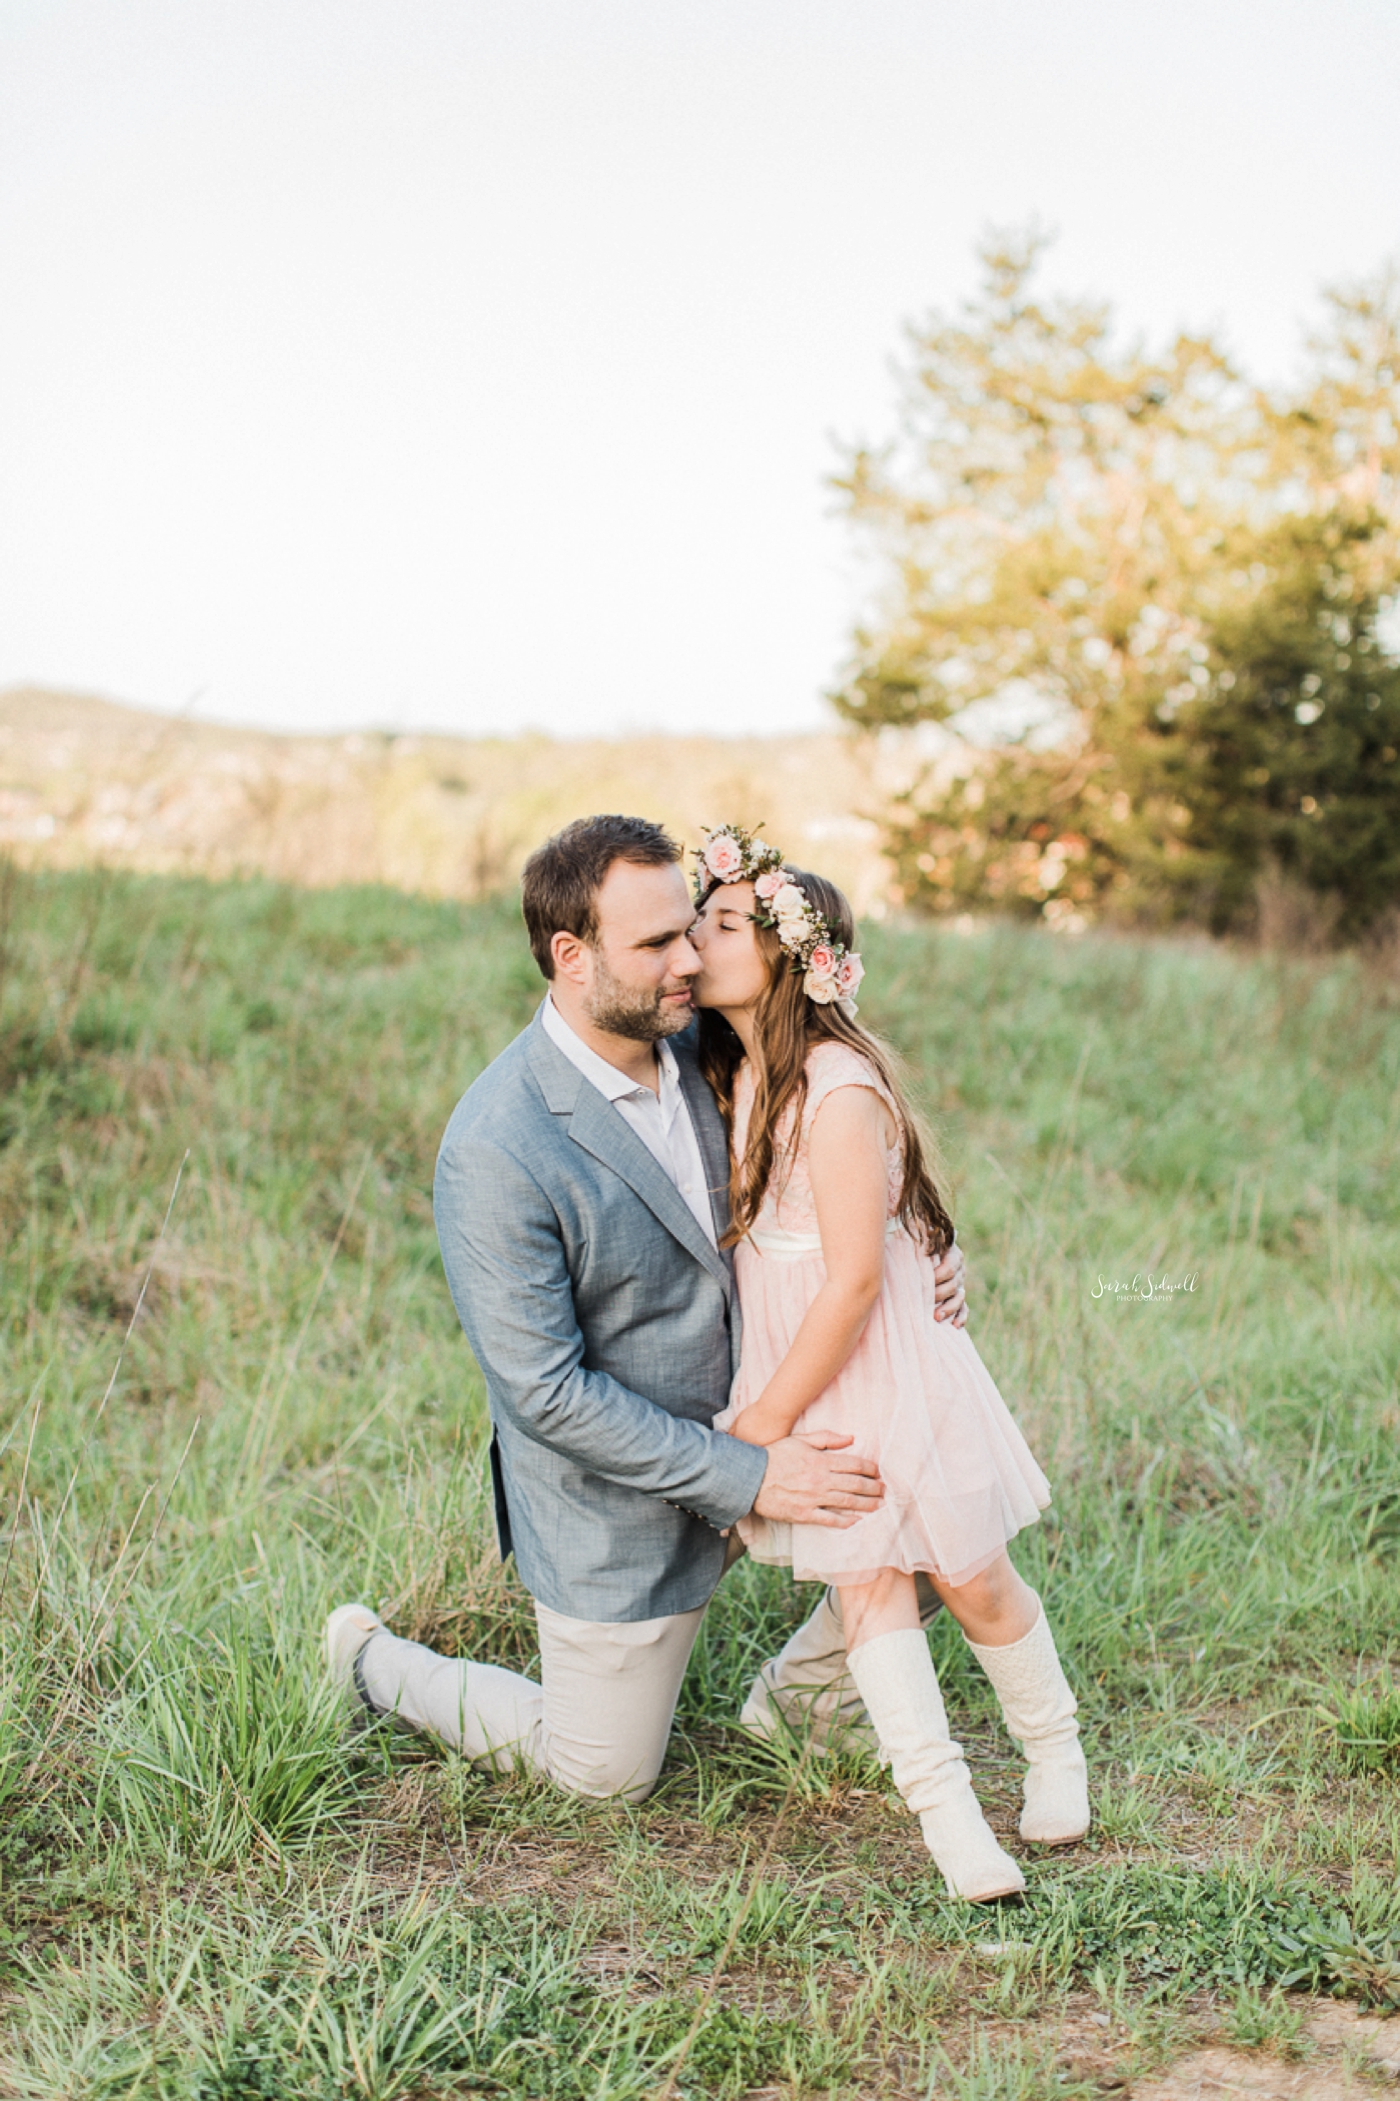 Nashville Family Pictures | Sarah Sidwell Photography